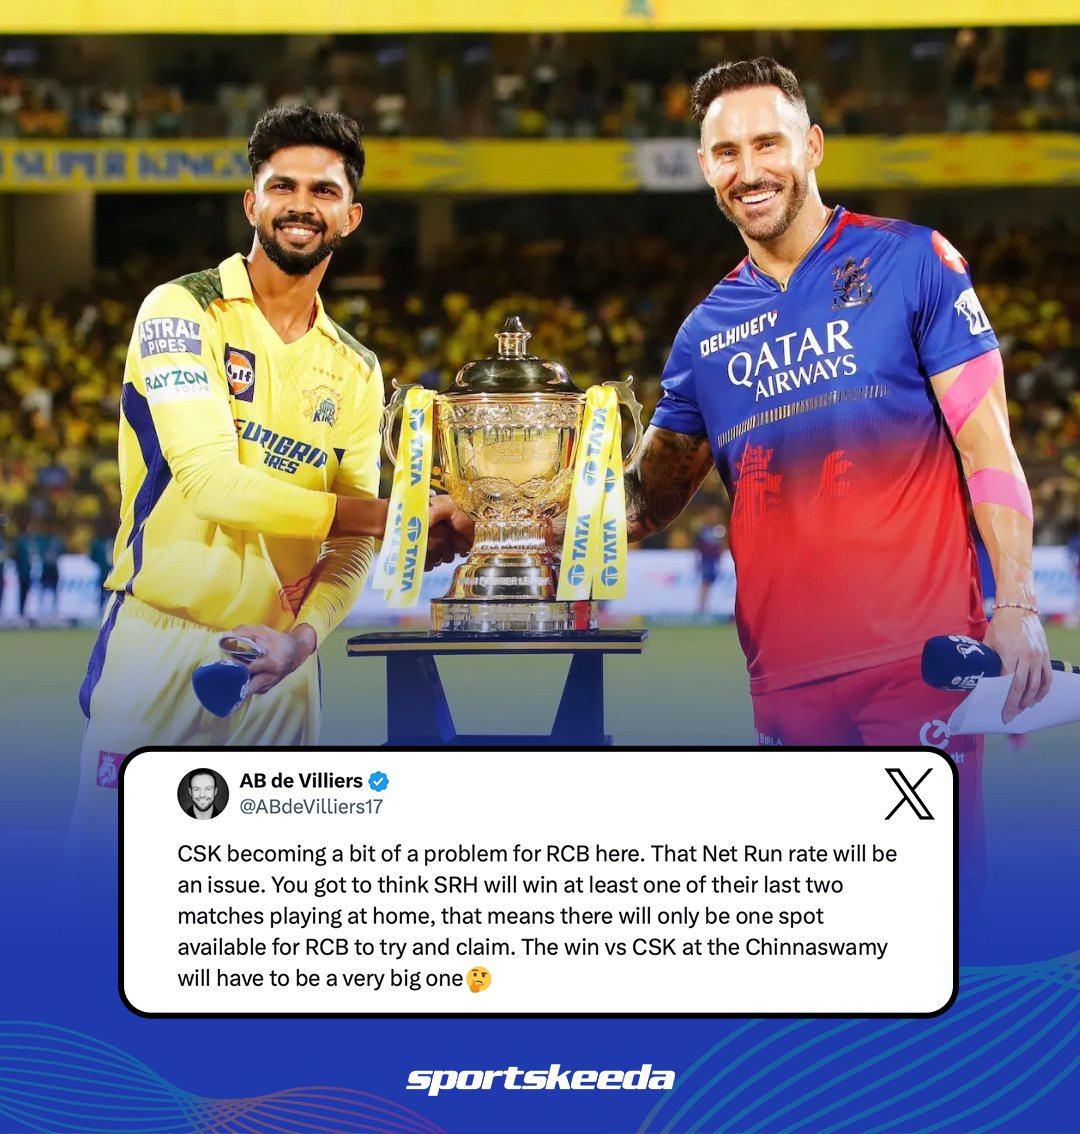 The ultimate showdown is loading at the Chinnaswamy on 18th May! ⚔️

#CSK #RCB #CricketTwitter #IPL2024